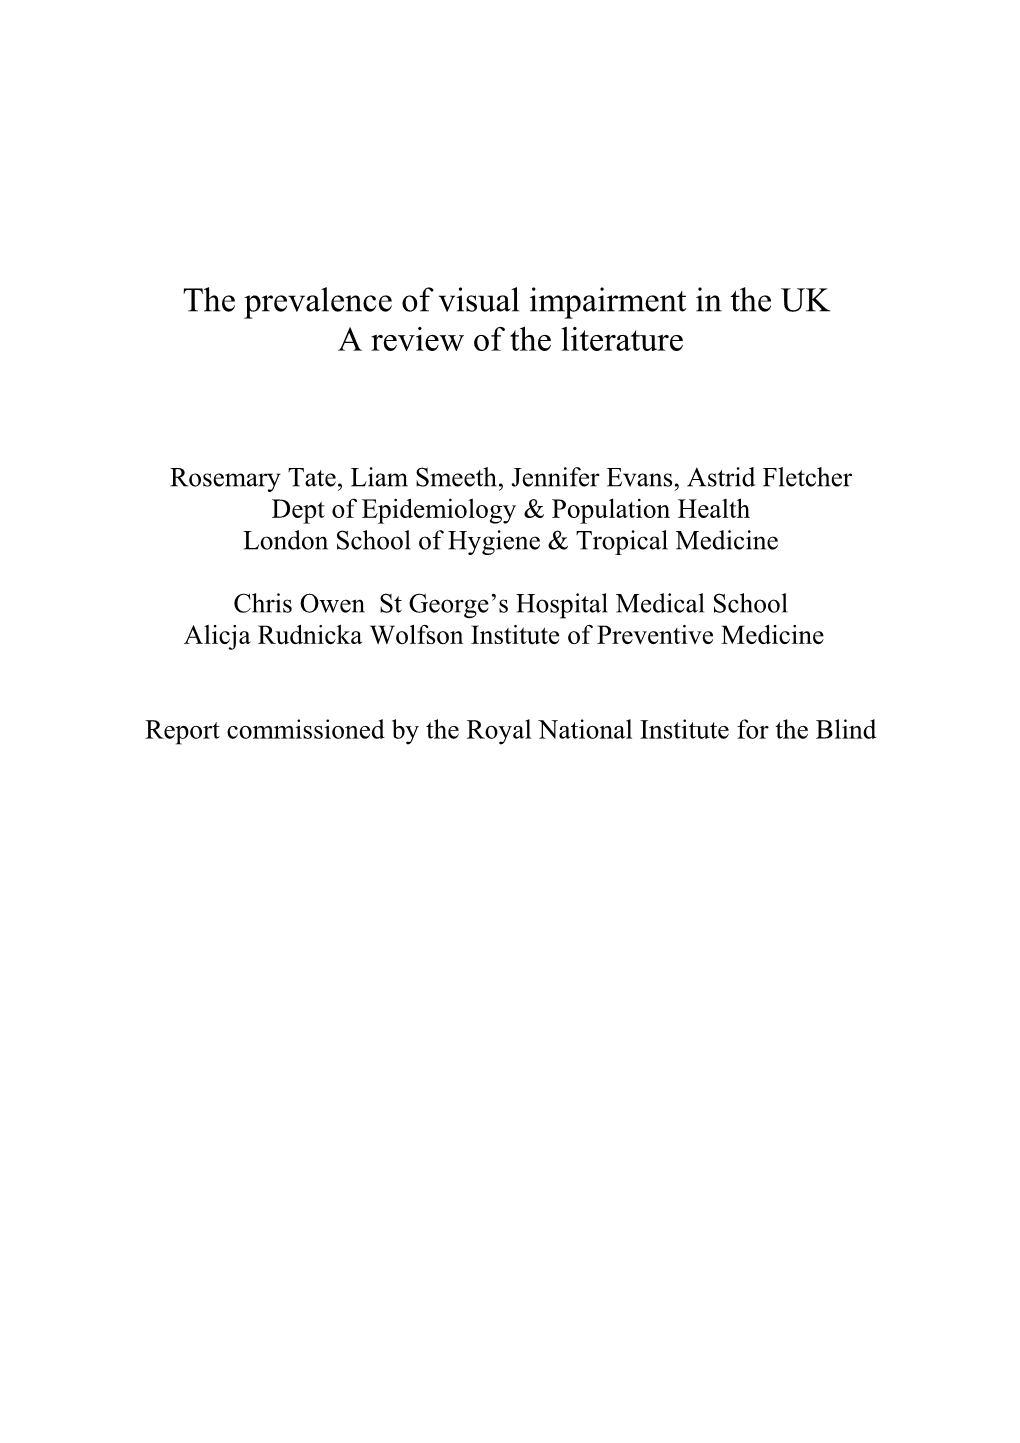 The Prevalence of Visual Impairment in the UK